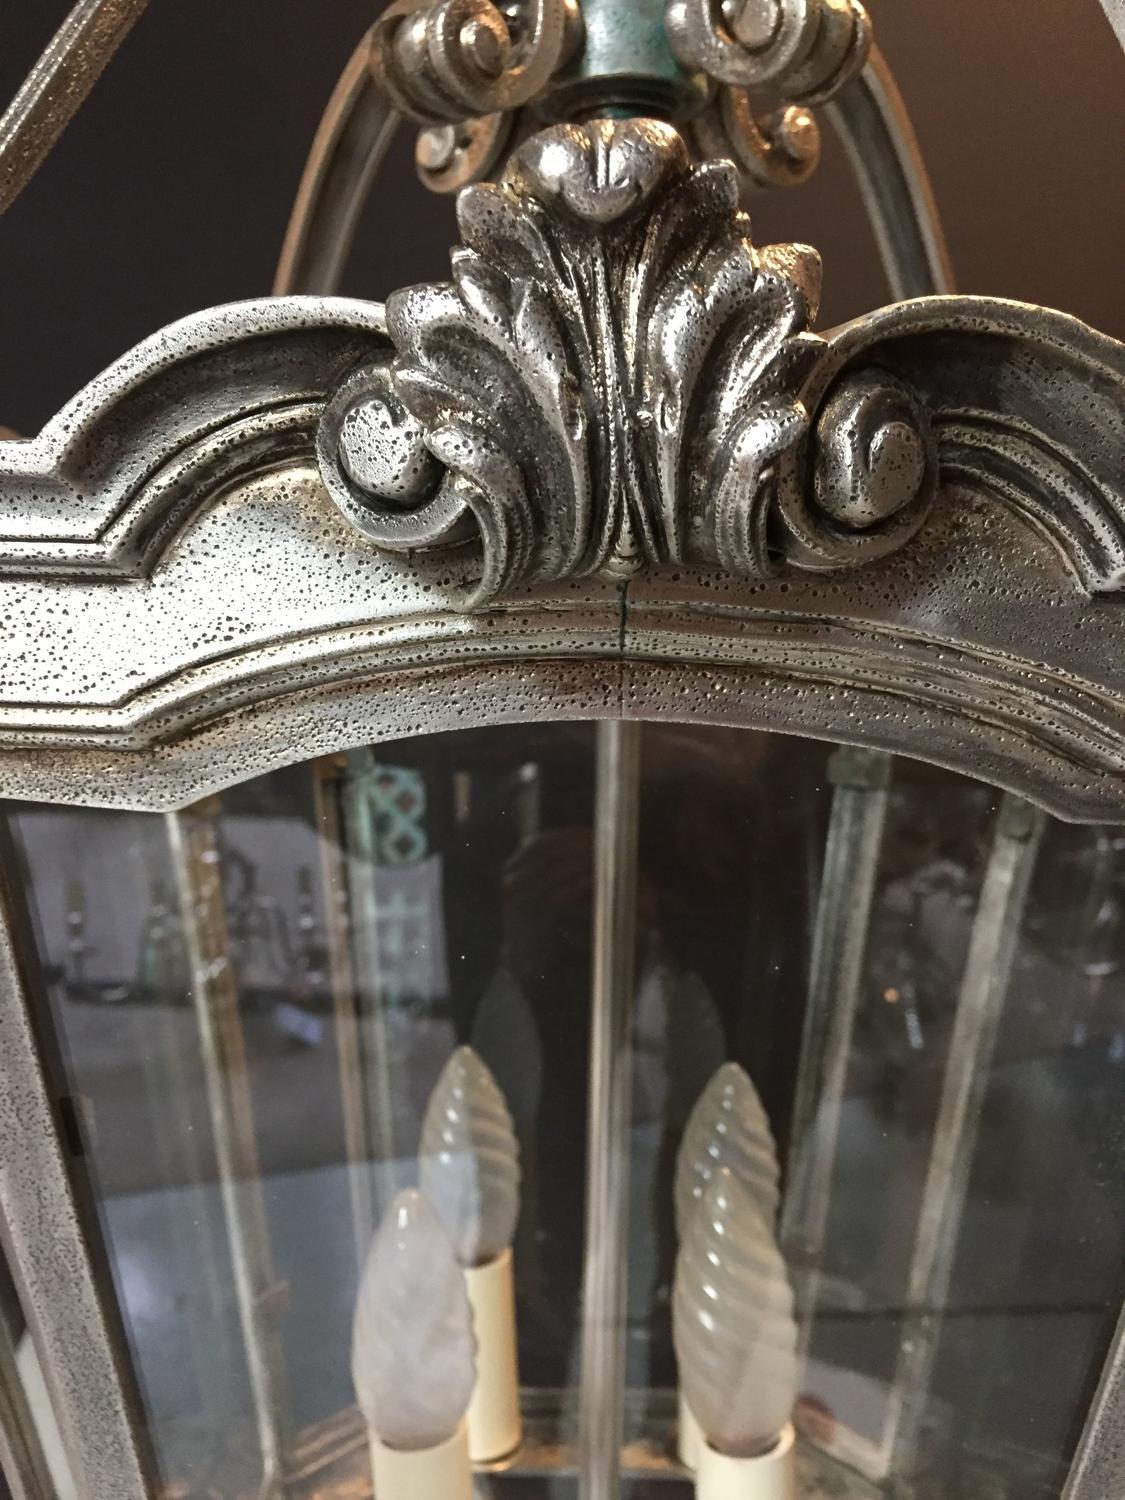 A fine quality, four light, silvered bronze hall lantern, in the Georgian style. A foliate decorated ring above an urn issuing scroll supports, canted corners and arched tapering sides with glass panels.